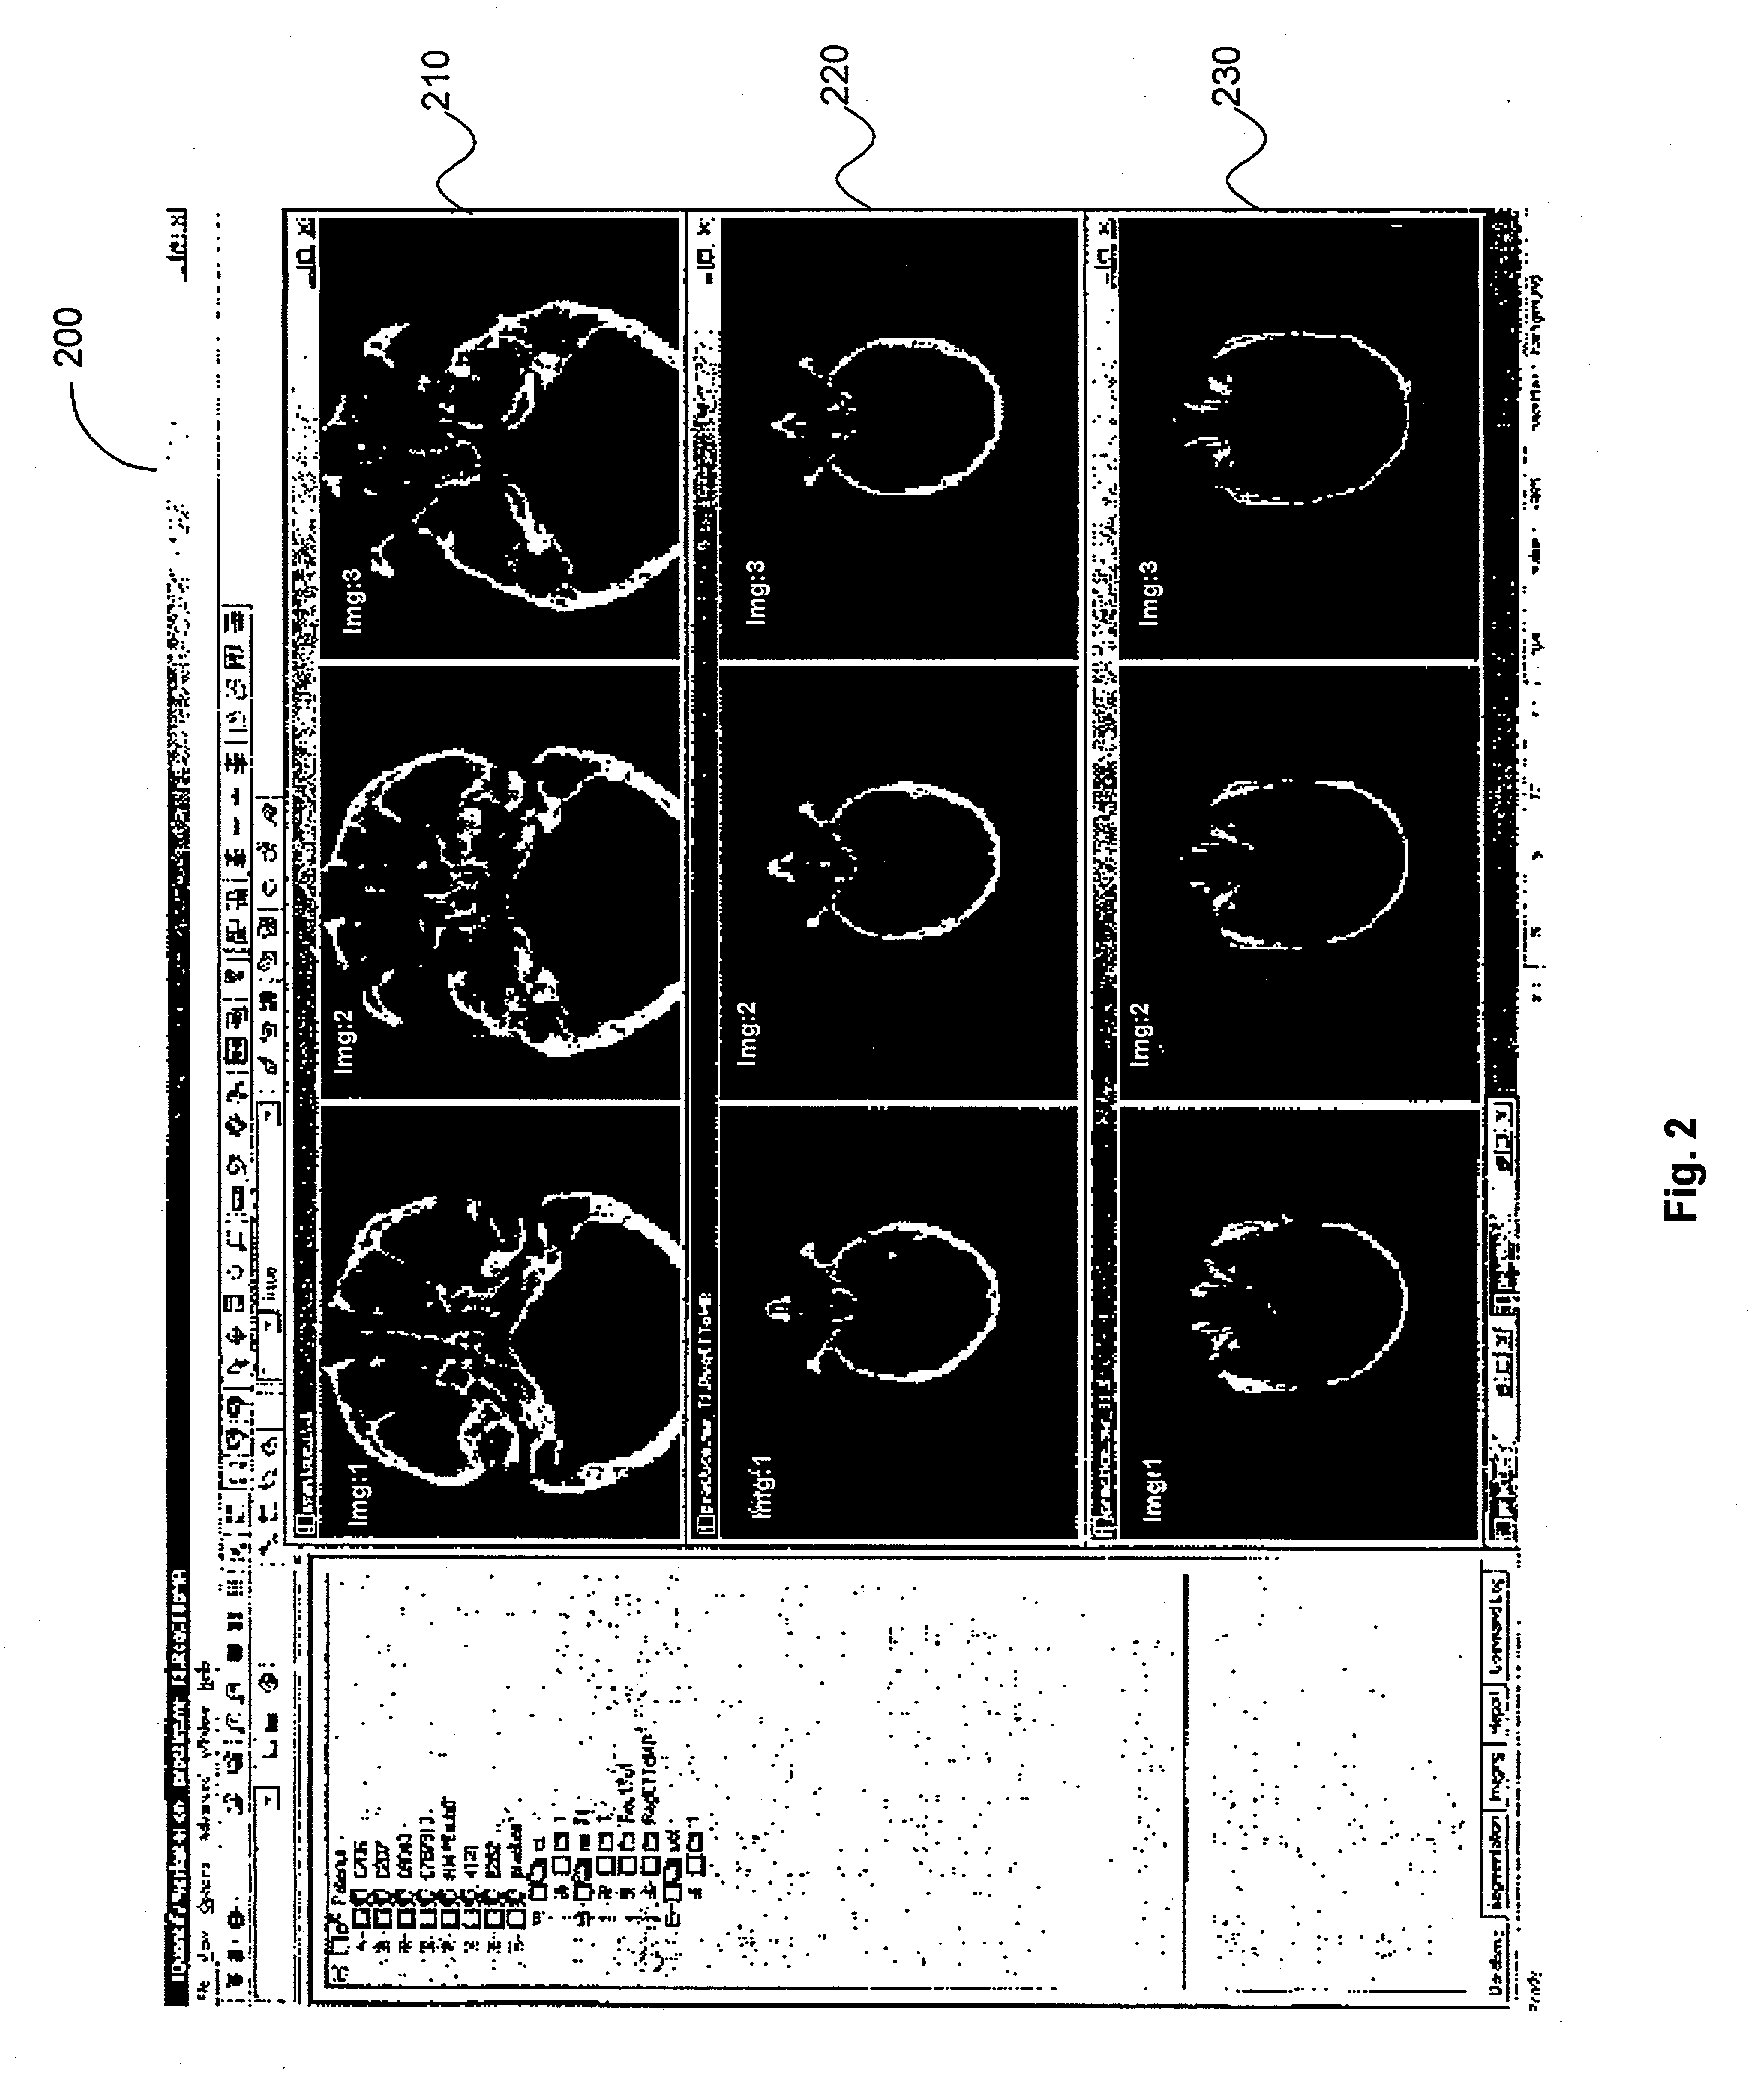 System and method for determining convergence of image set registration